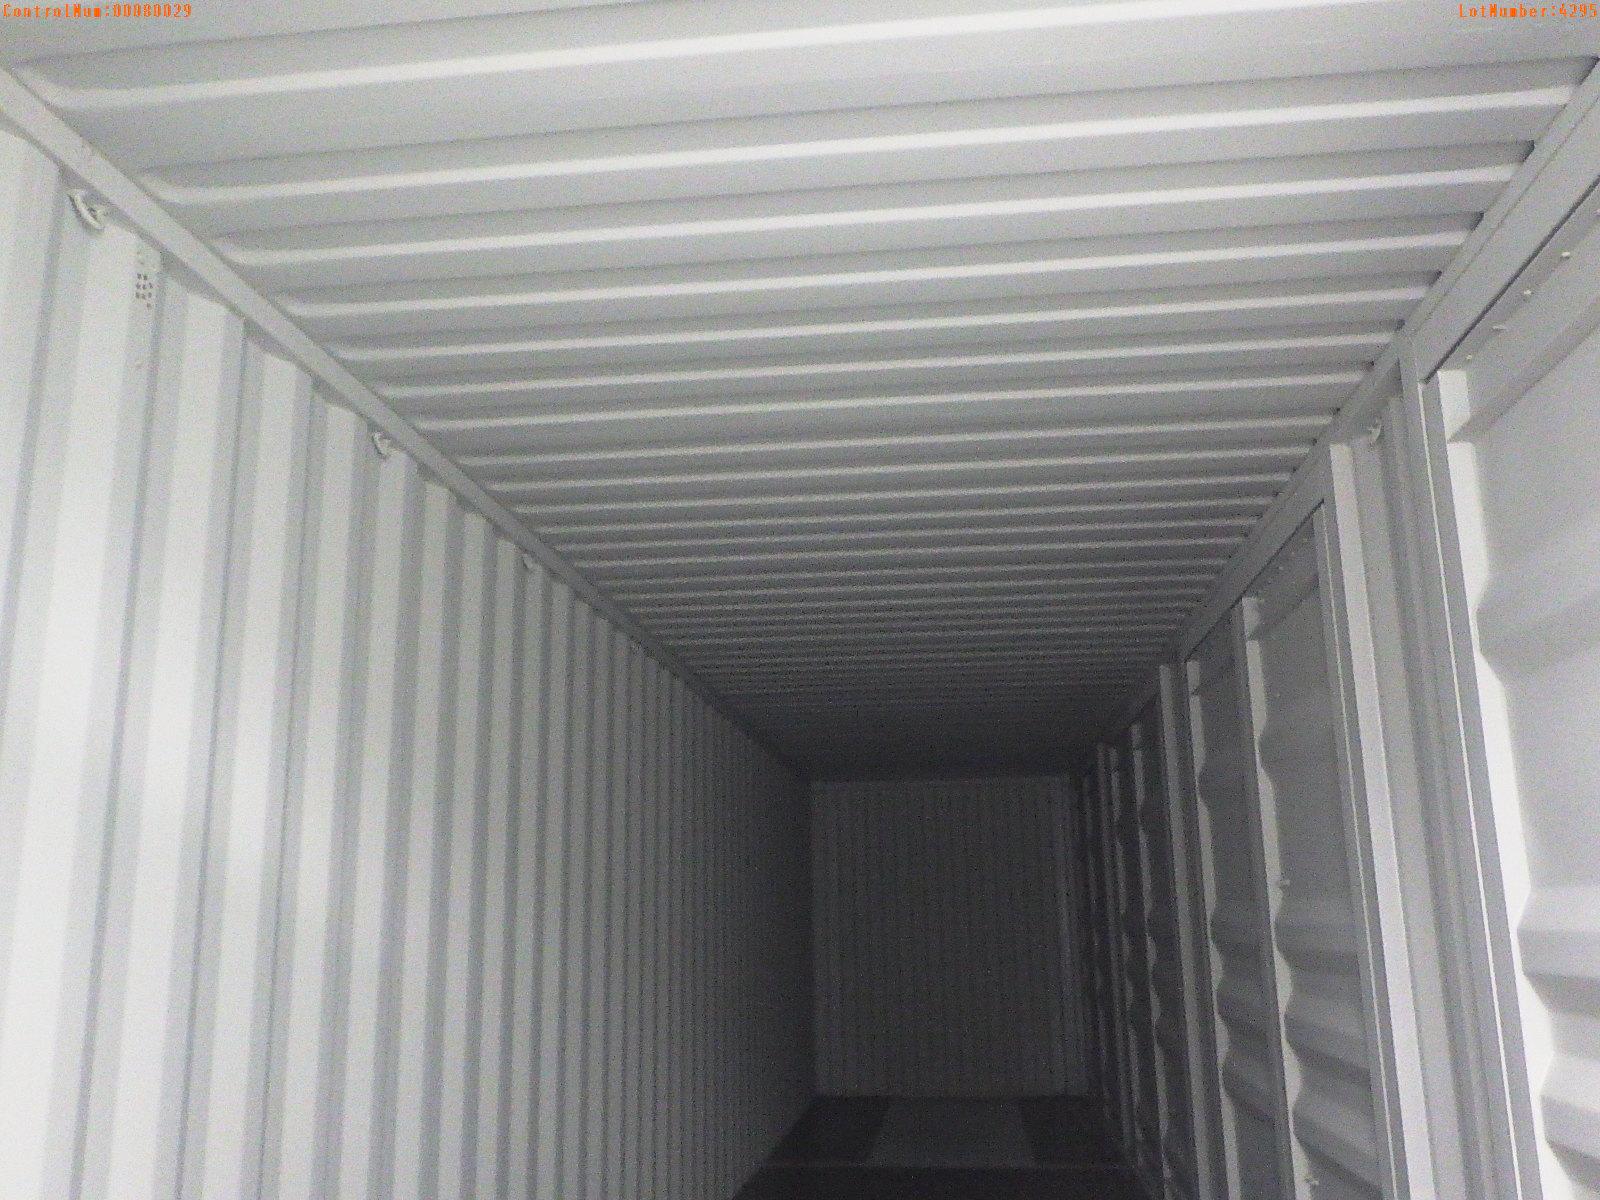 5-04295 (Equip.-Container)  Seller:Private/Dealer 40 FOOT METAL SHIPPING CONTAIN